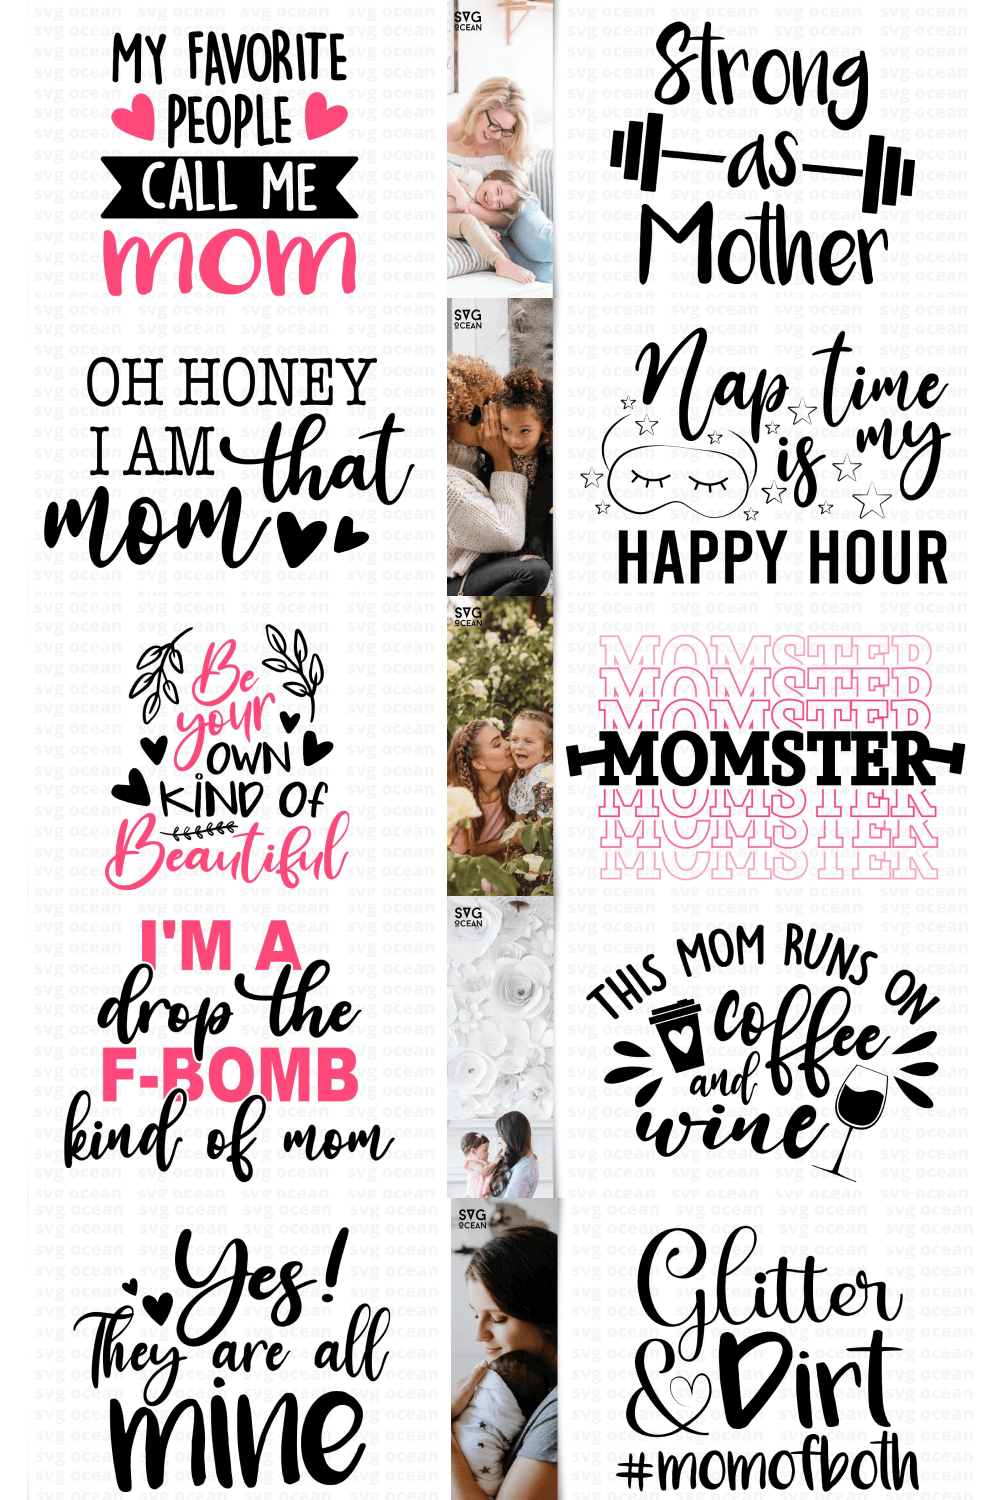 This Mom Runs on Coffee and Wine.